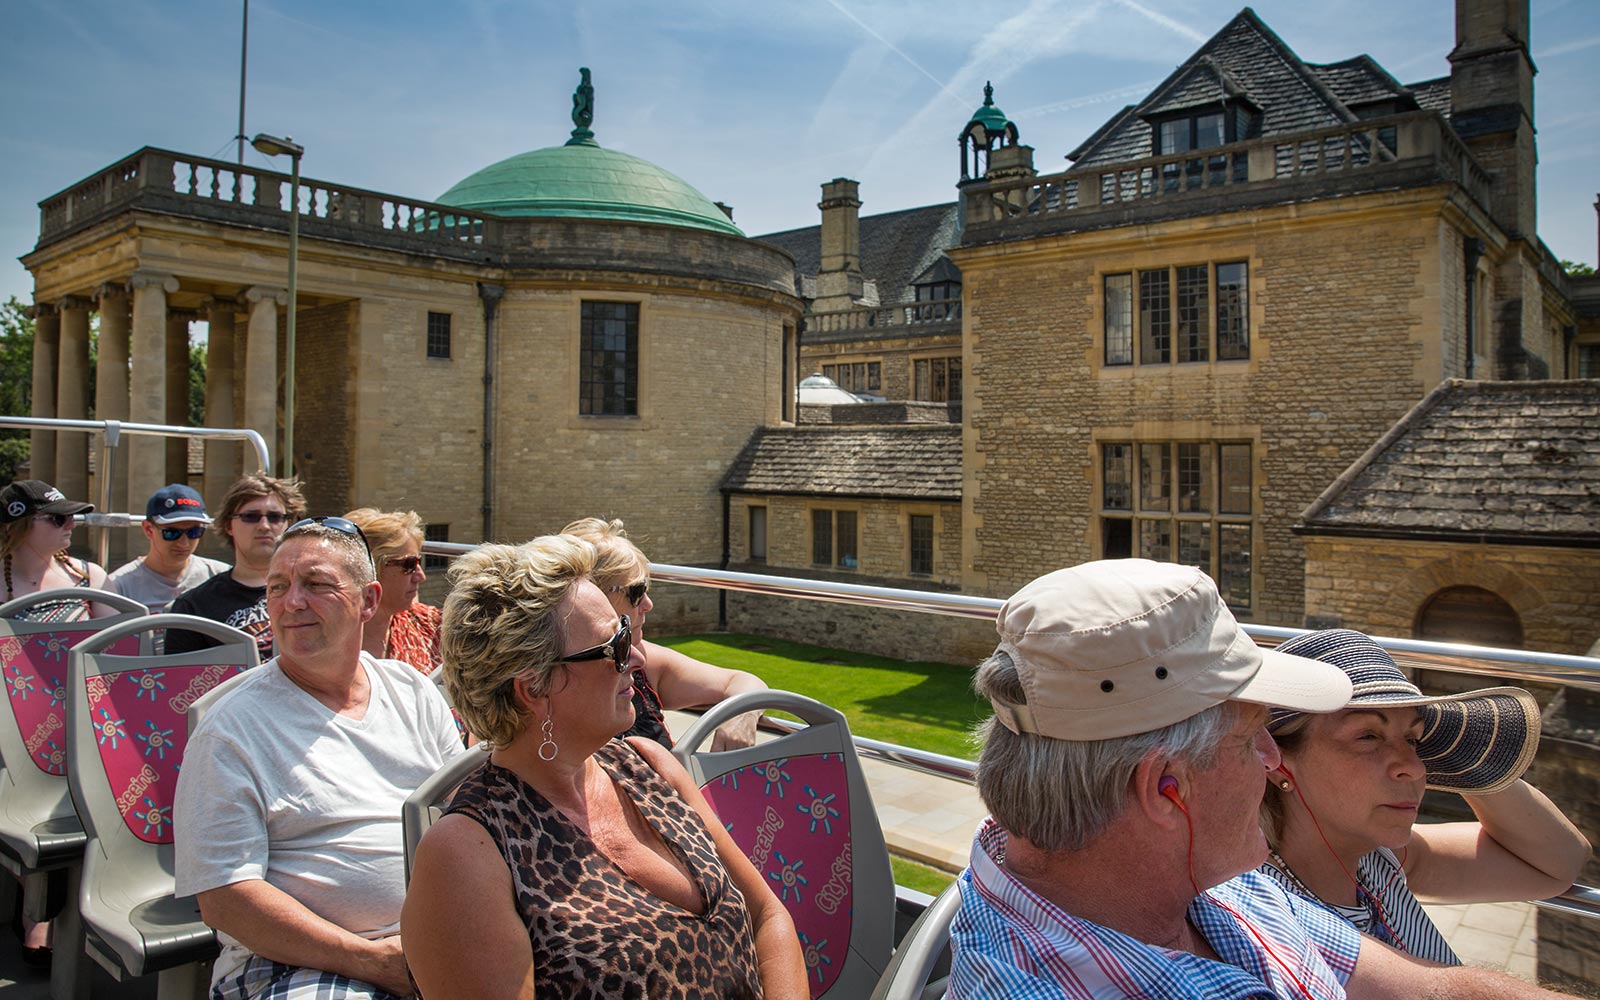 Image of Day Tour of Oxford with Hop-On Hop-Off Bus Tour & Rail Transfers from London